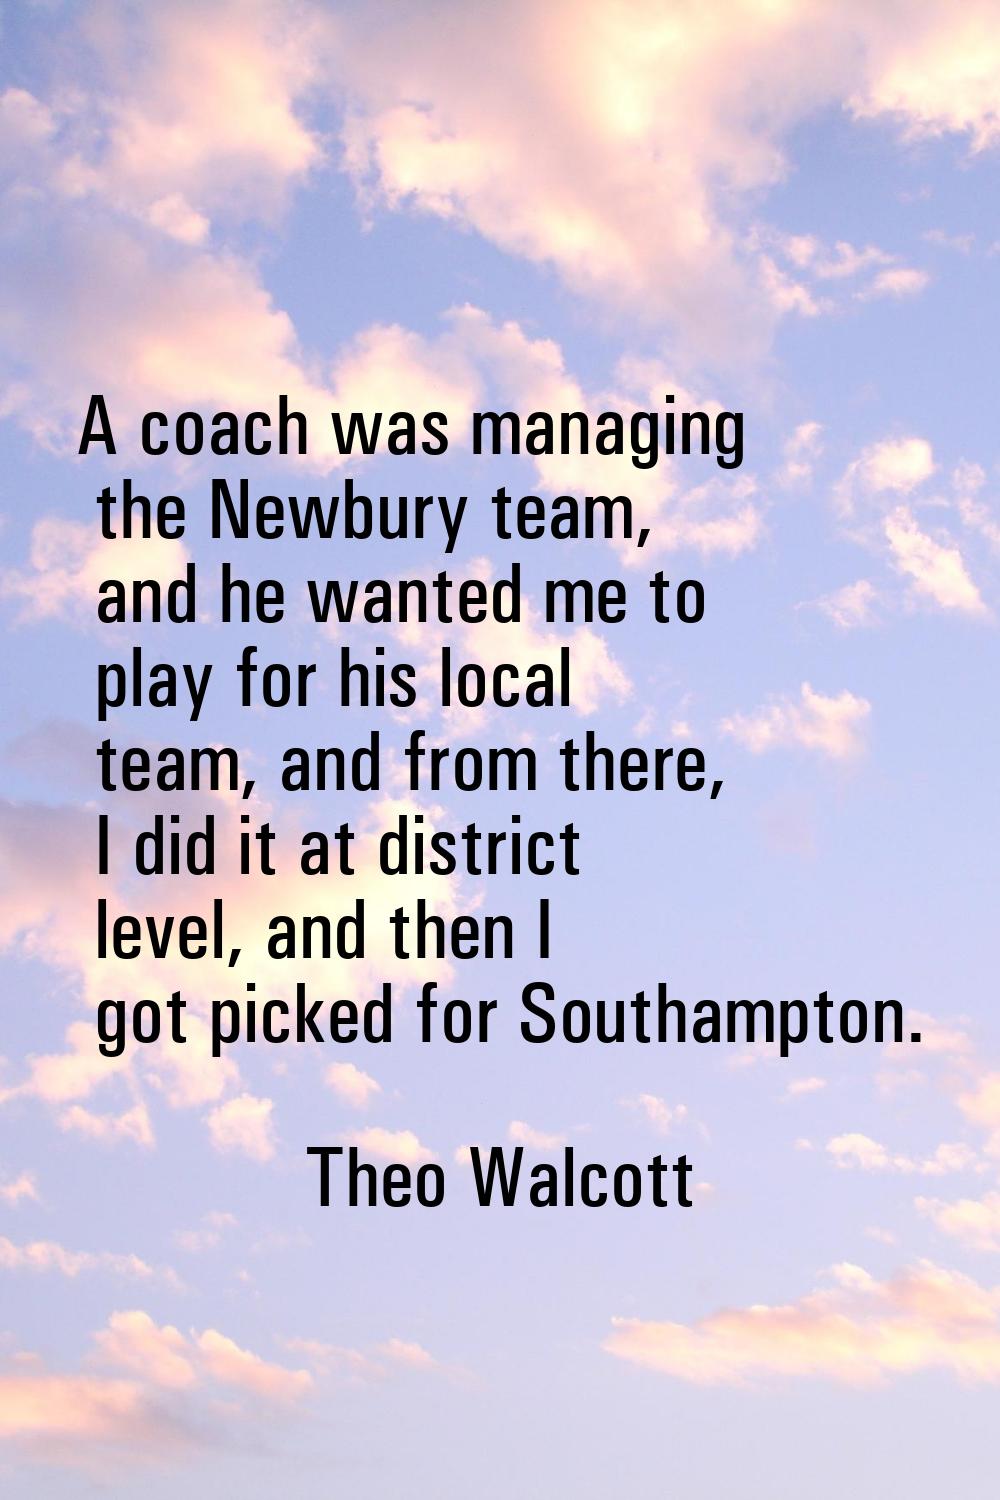 A coach was managing the Newbury team, and he wanted me to play for his local team, and from there,